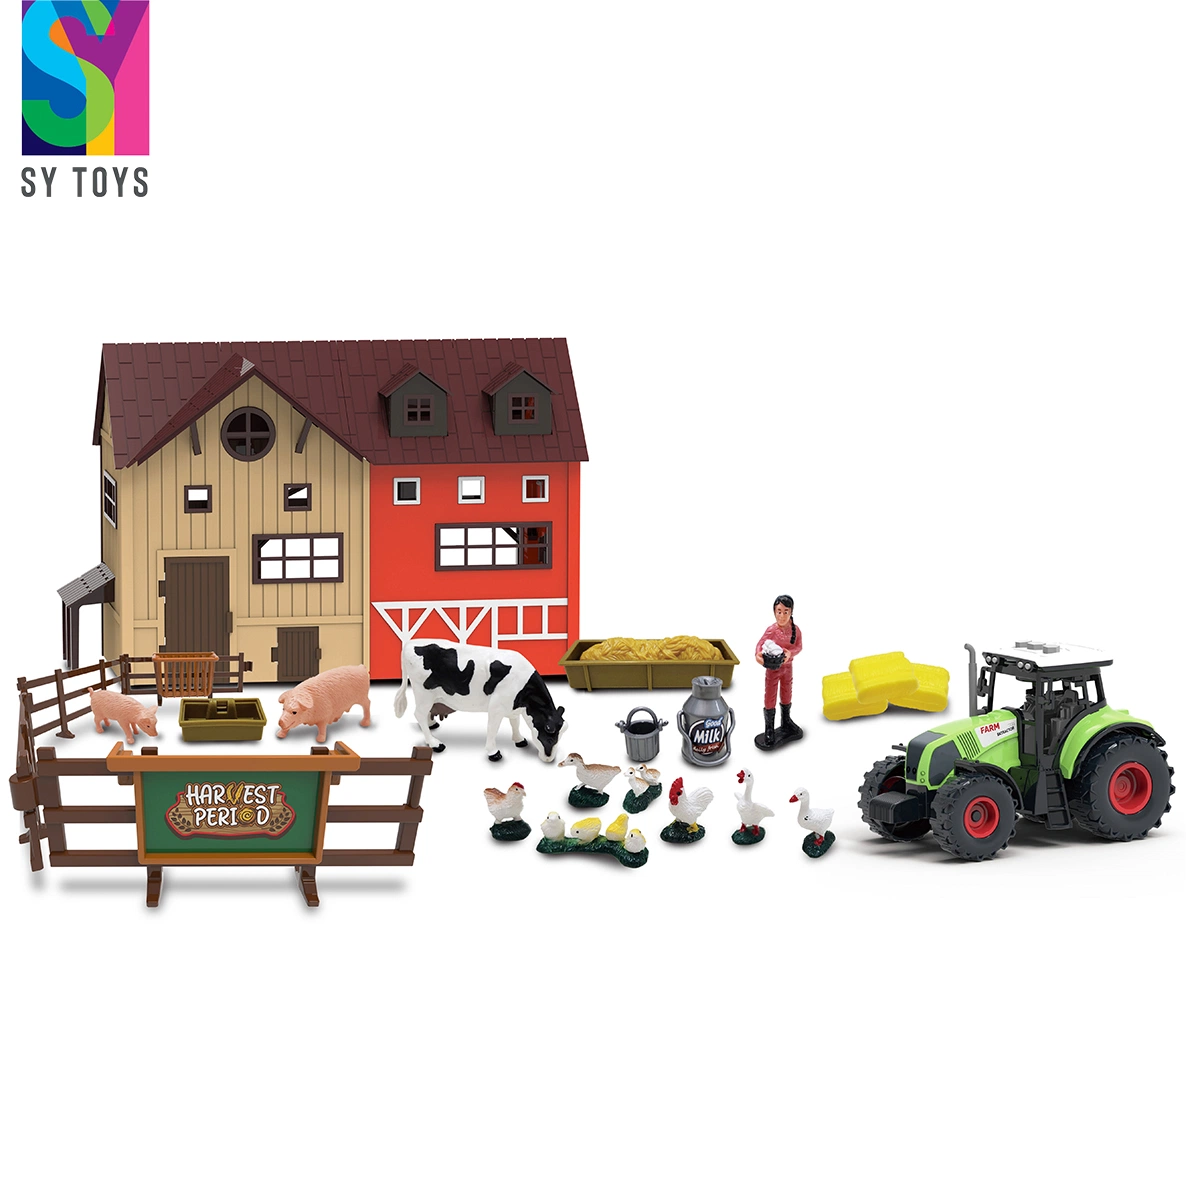 Sy Toys Pretend Play 101PCS DIY Plastic Small Animal Farm House Tractor Model Toys for Kids